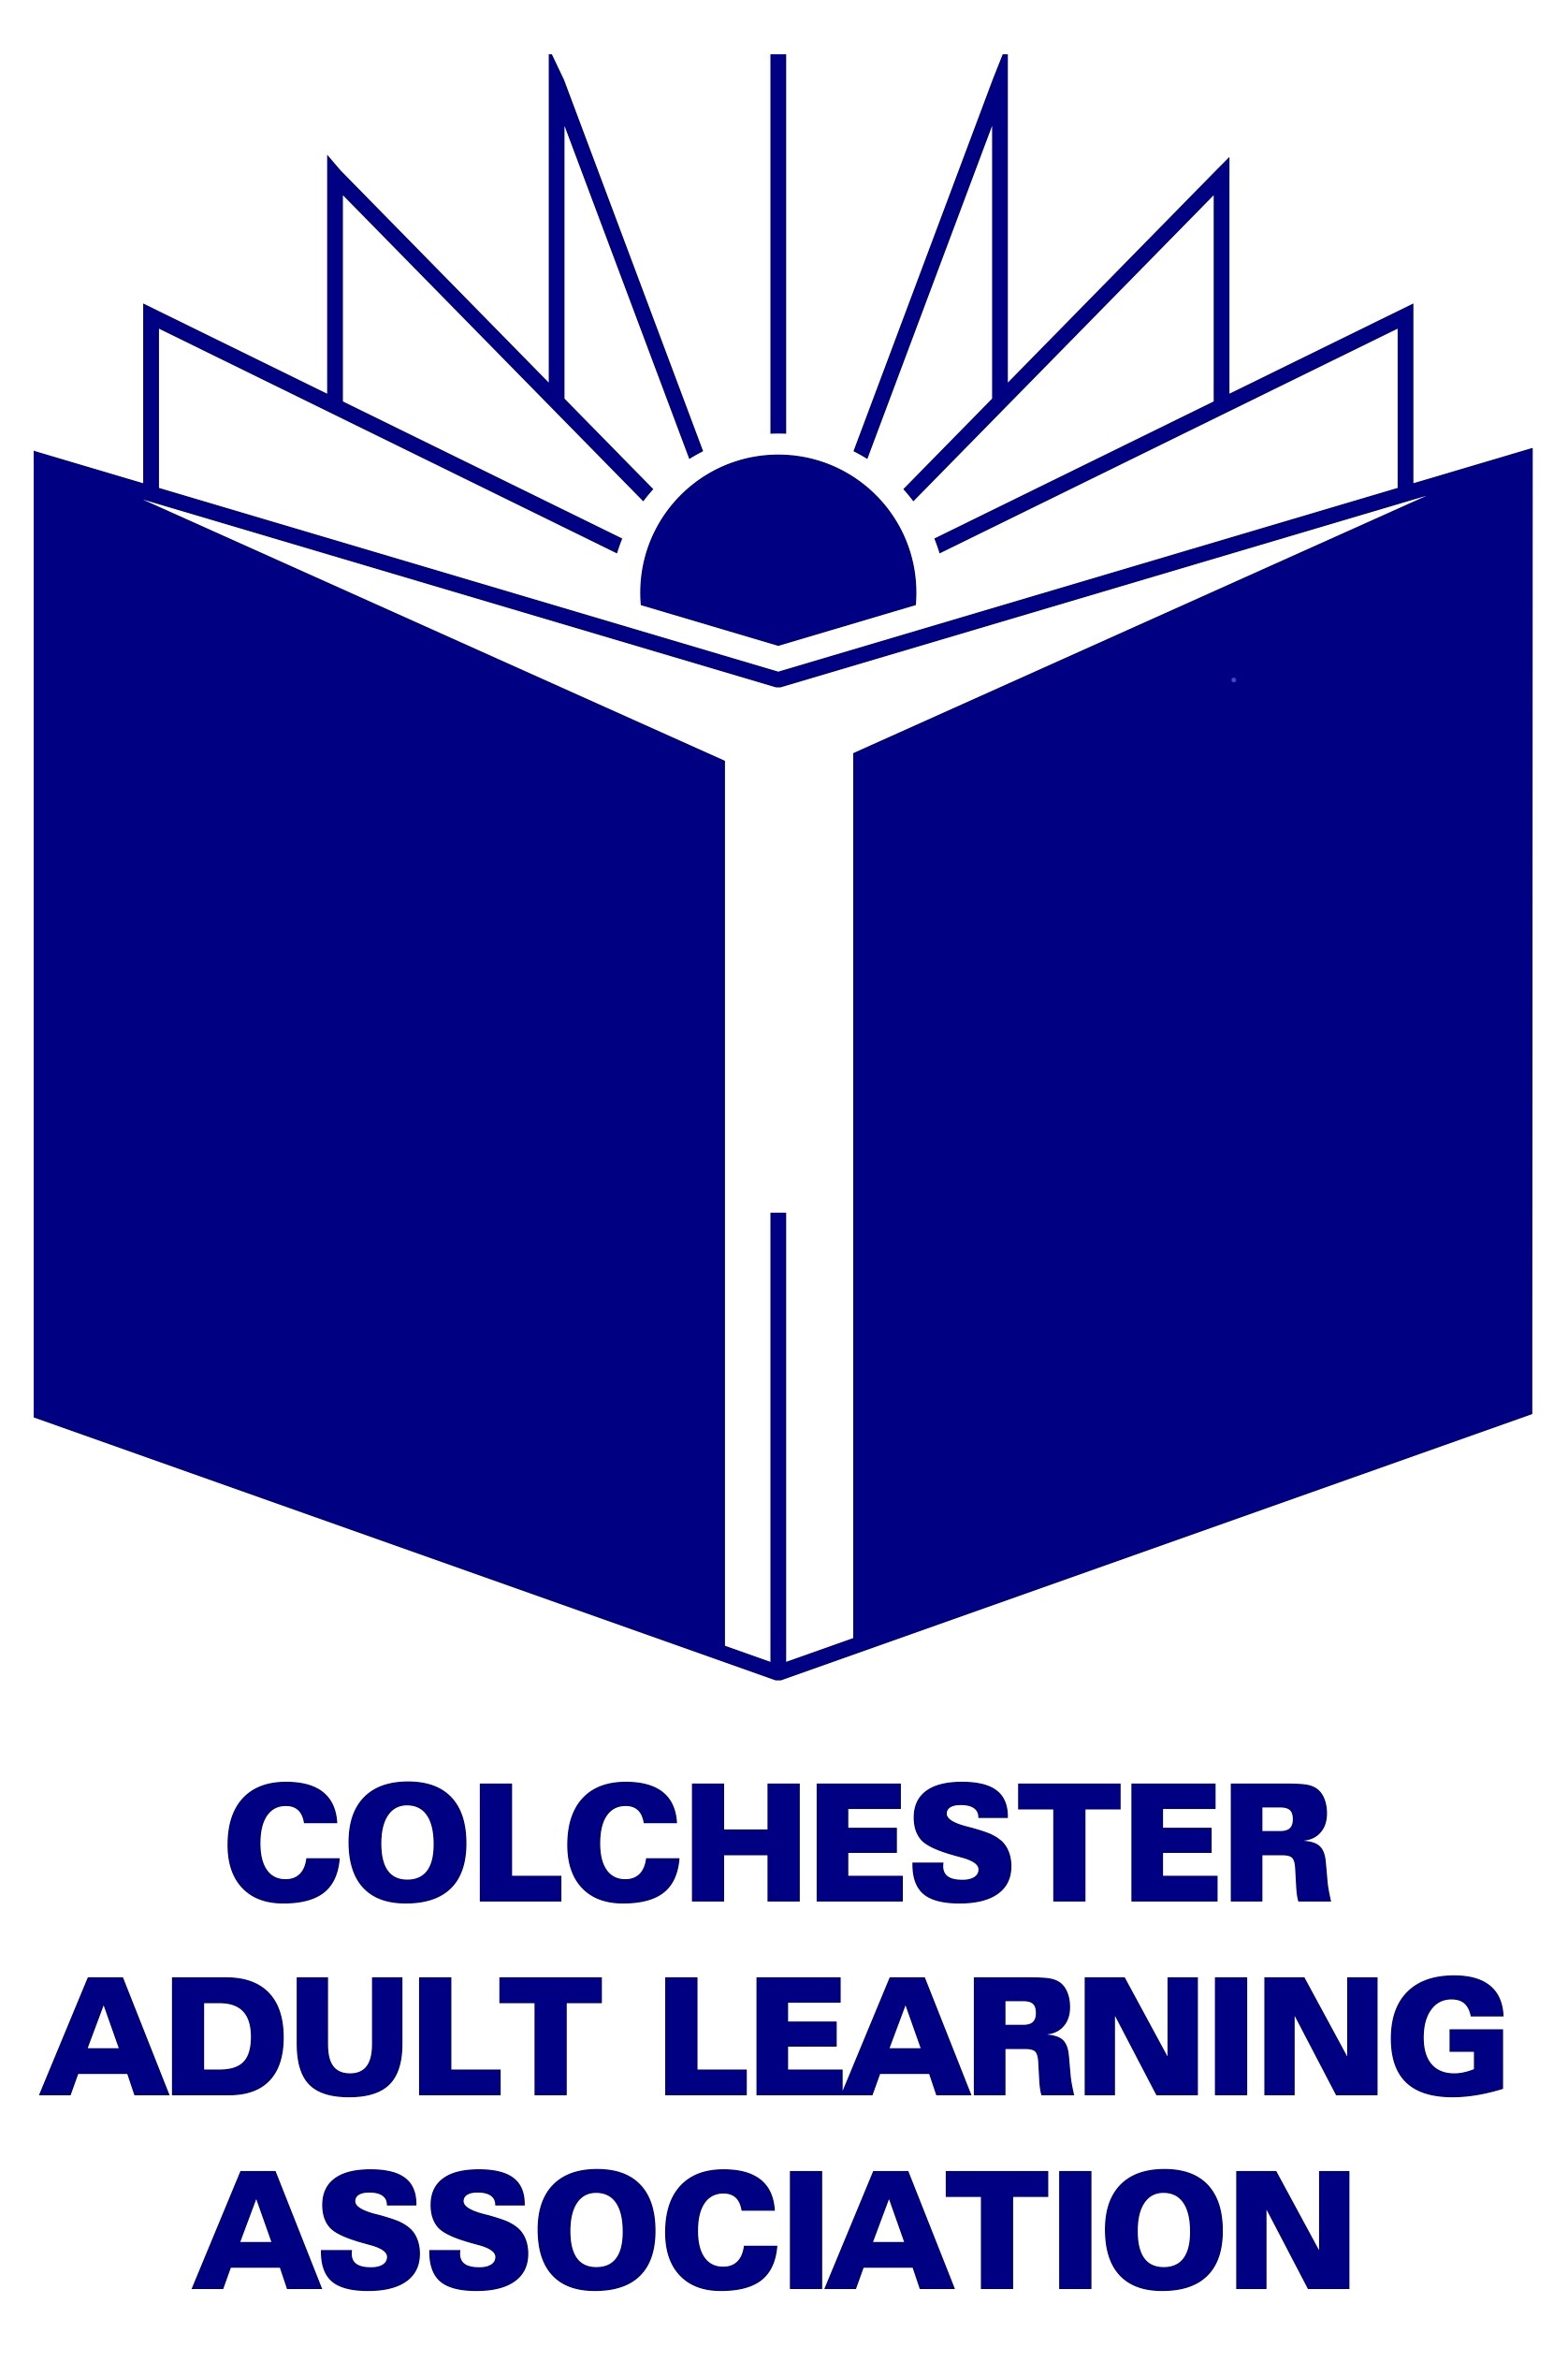 Colchester Adult Learning